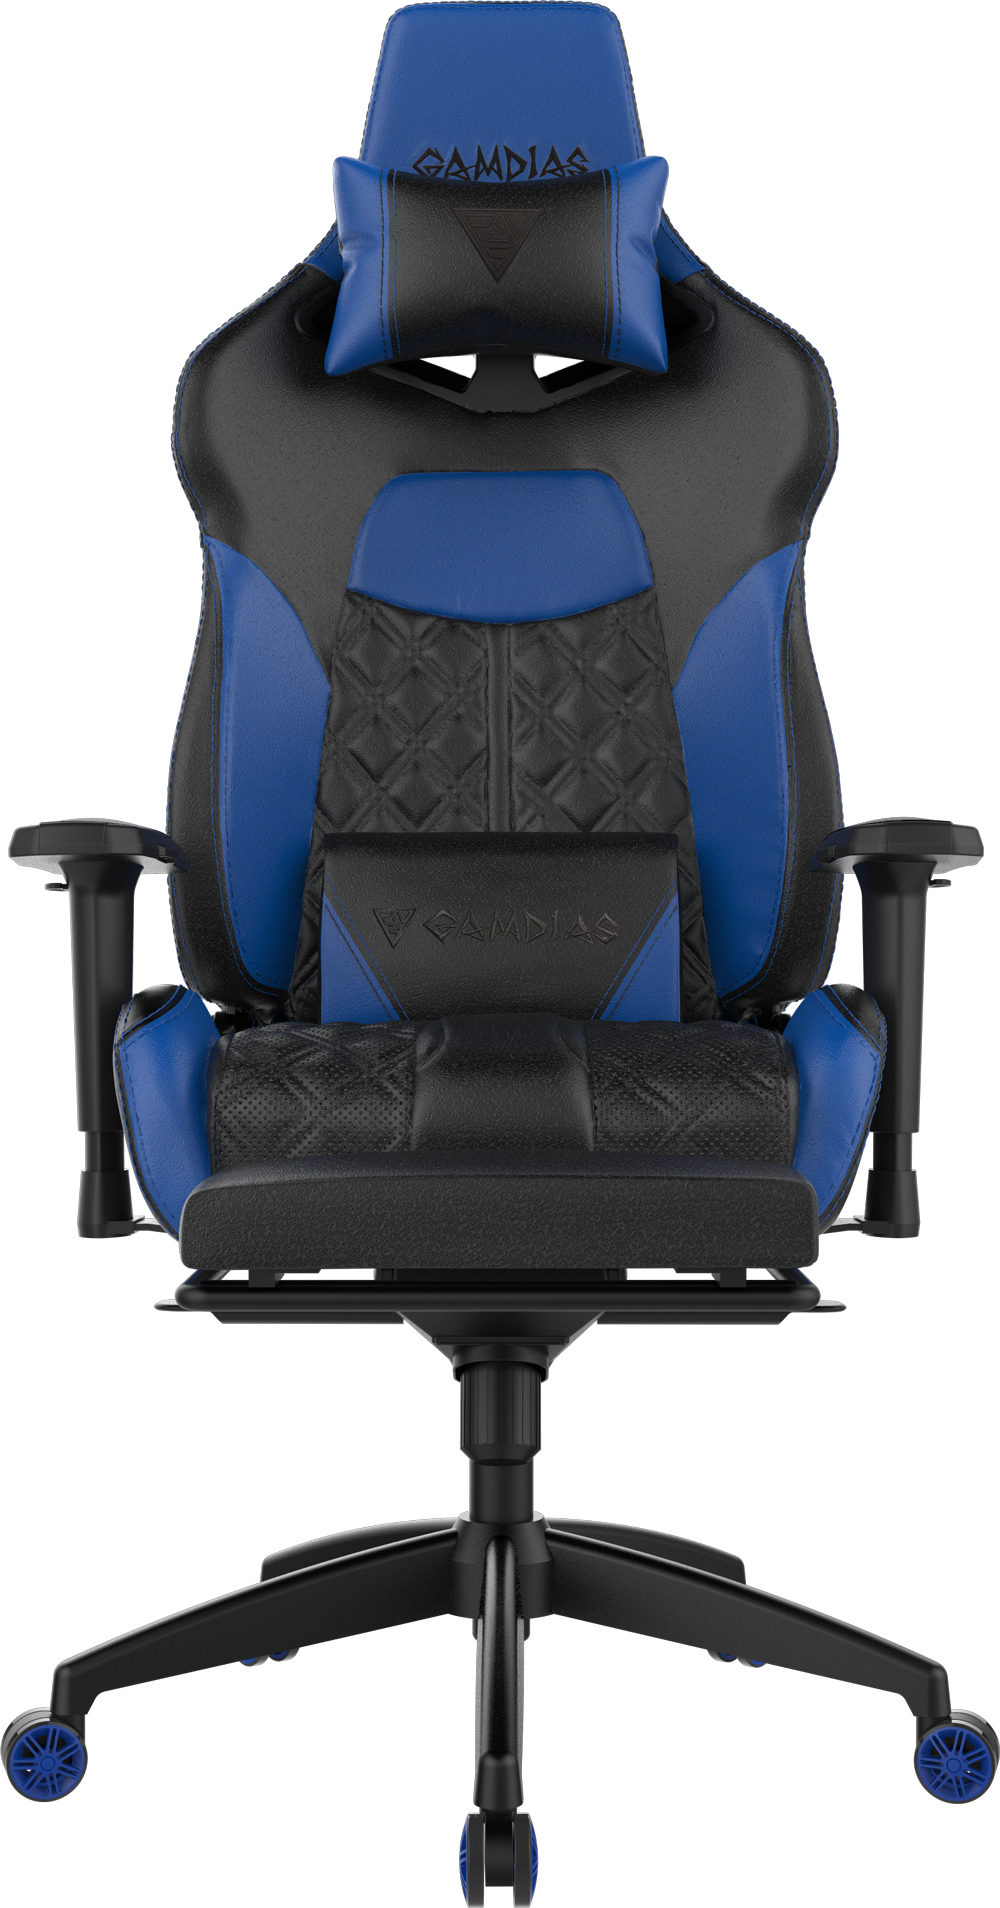 Gamdias Achilles P1 Black & Blue Gaming Chair - Best Deal - South Africa